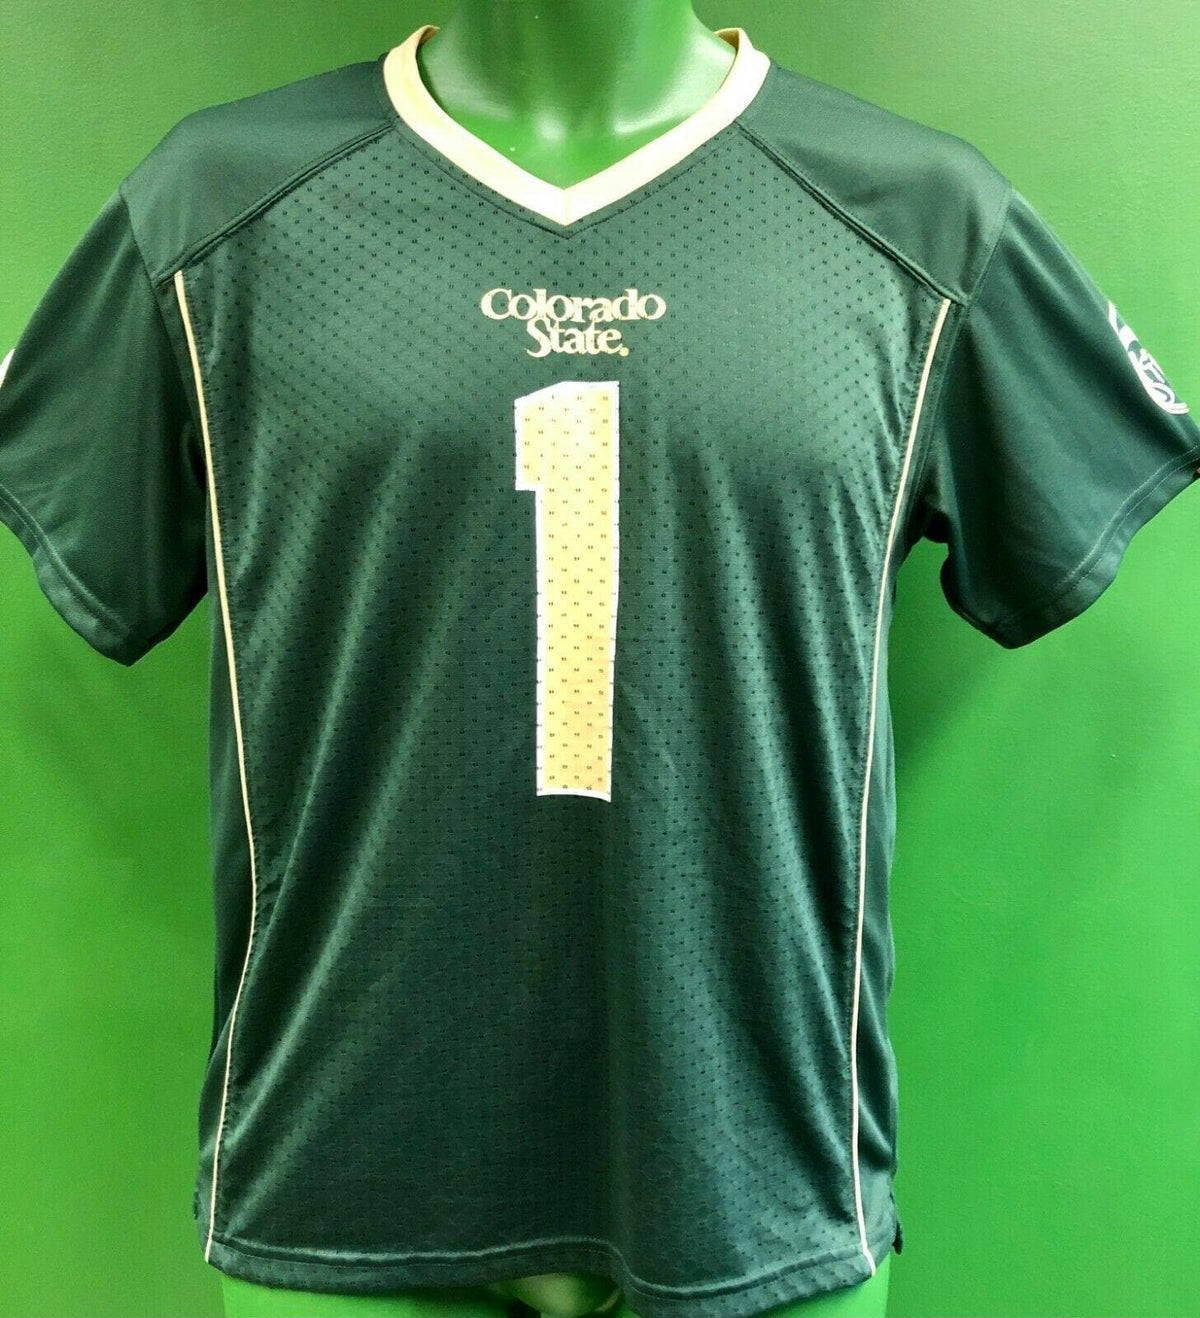 NCAA Colorado State Rams #1 Jersey Youth Large 12-14